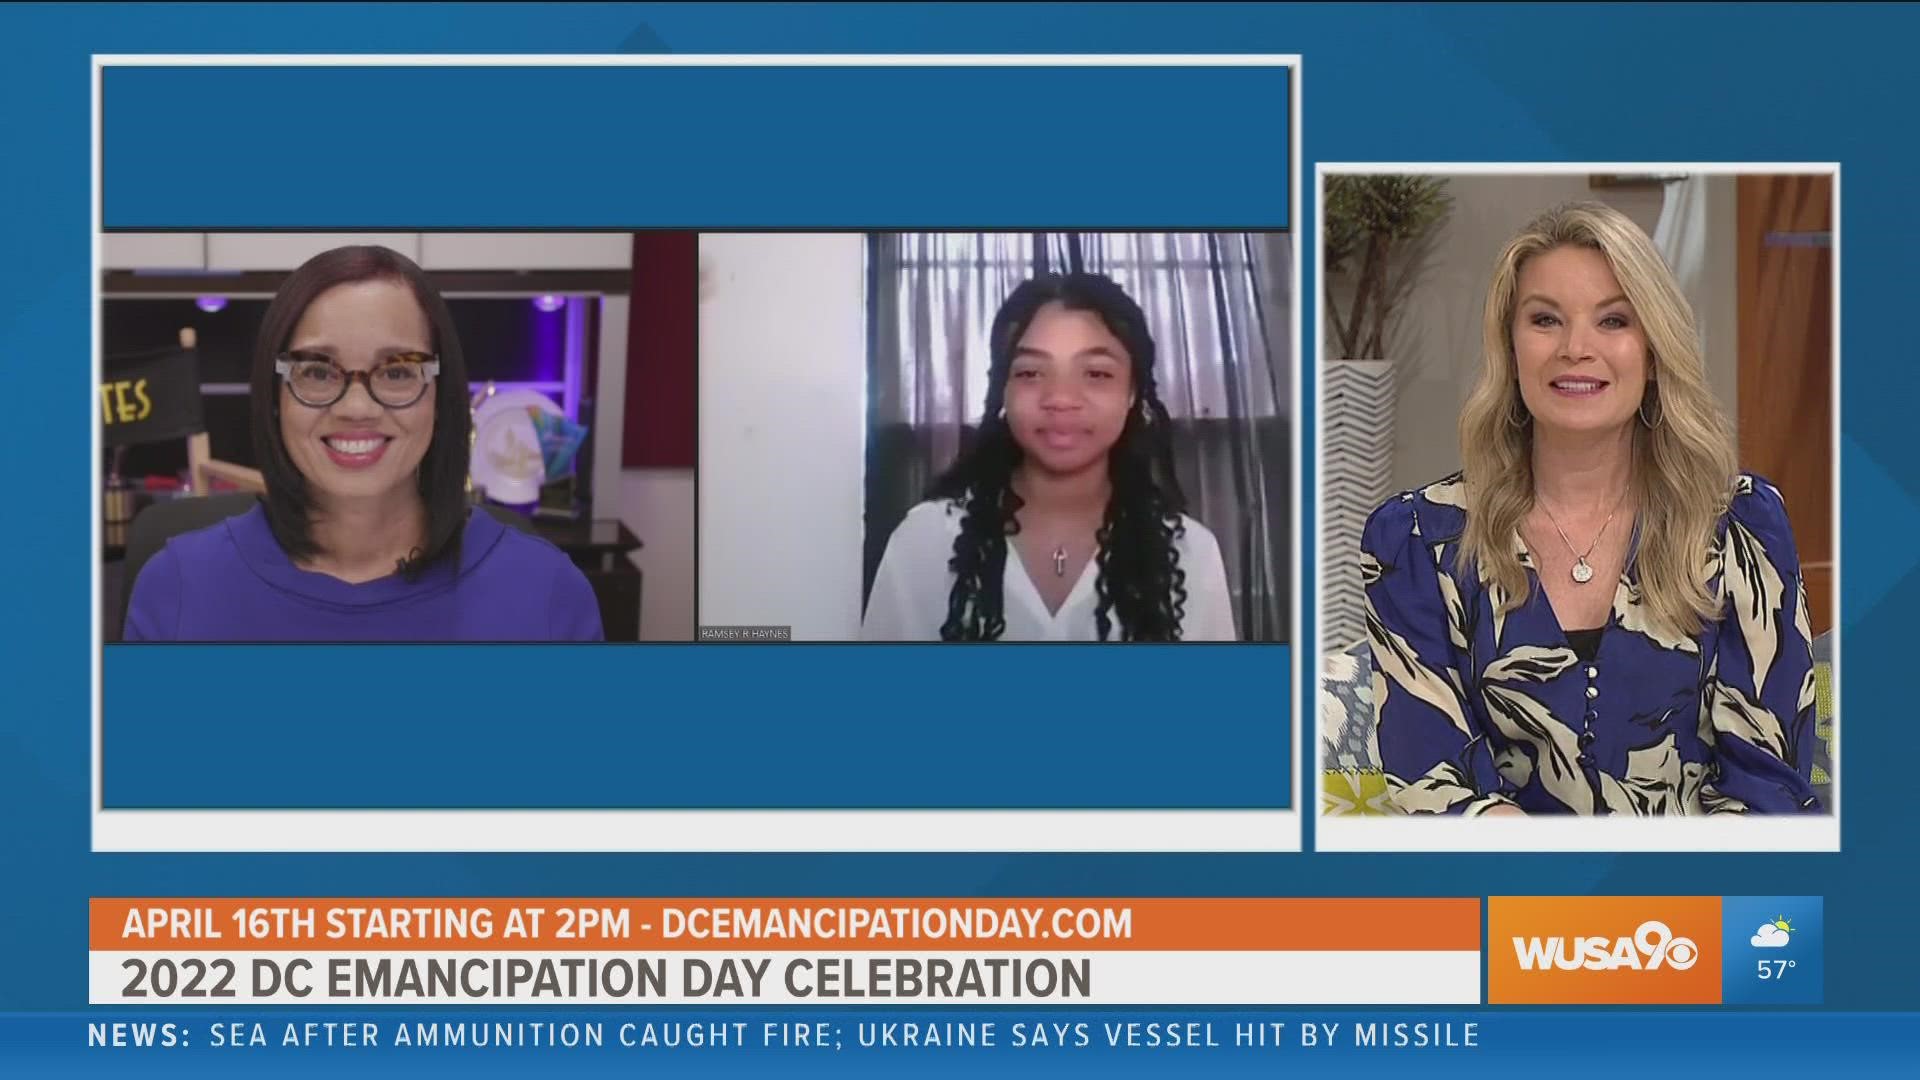 Dr. Angie M. Gates, director of DC OCTFME talks about the 2022 DC Emancipation Day Celebration events along with singer Renee Ramsey who is one of the performers.